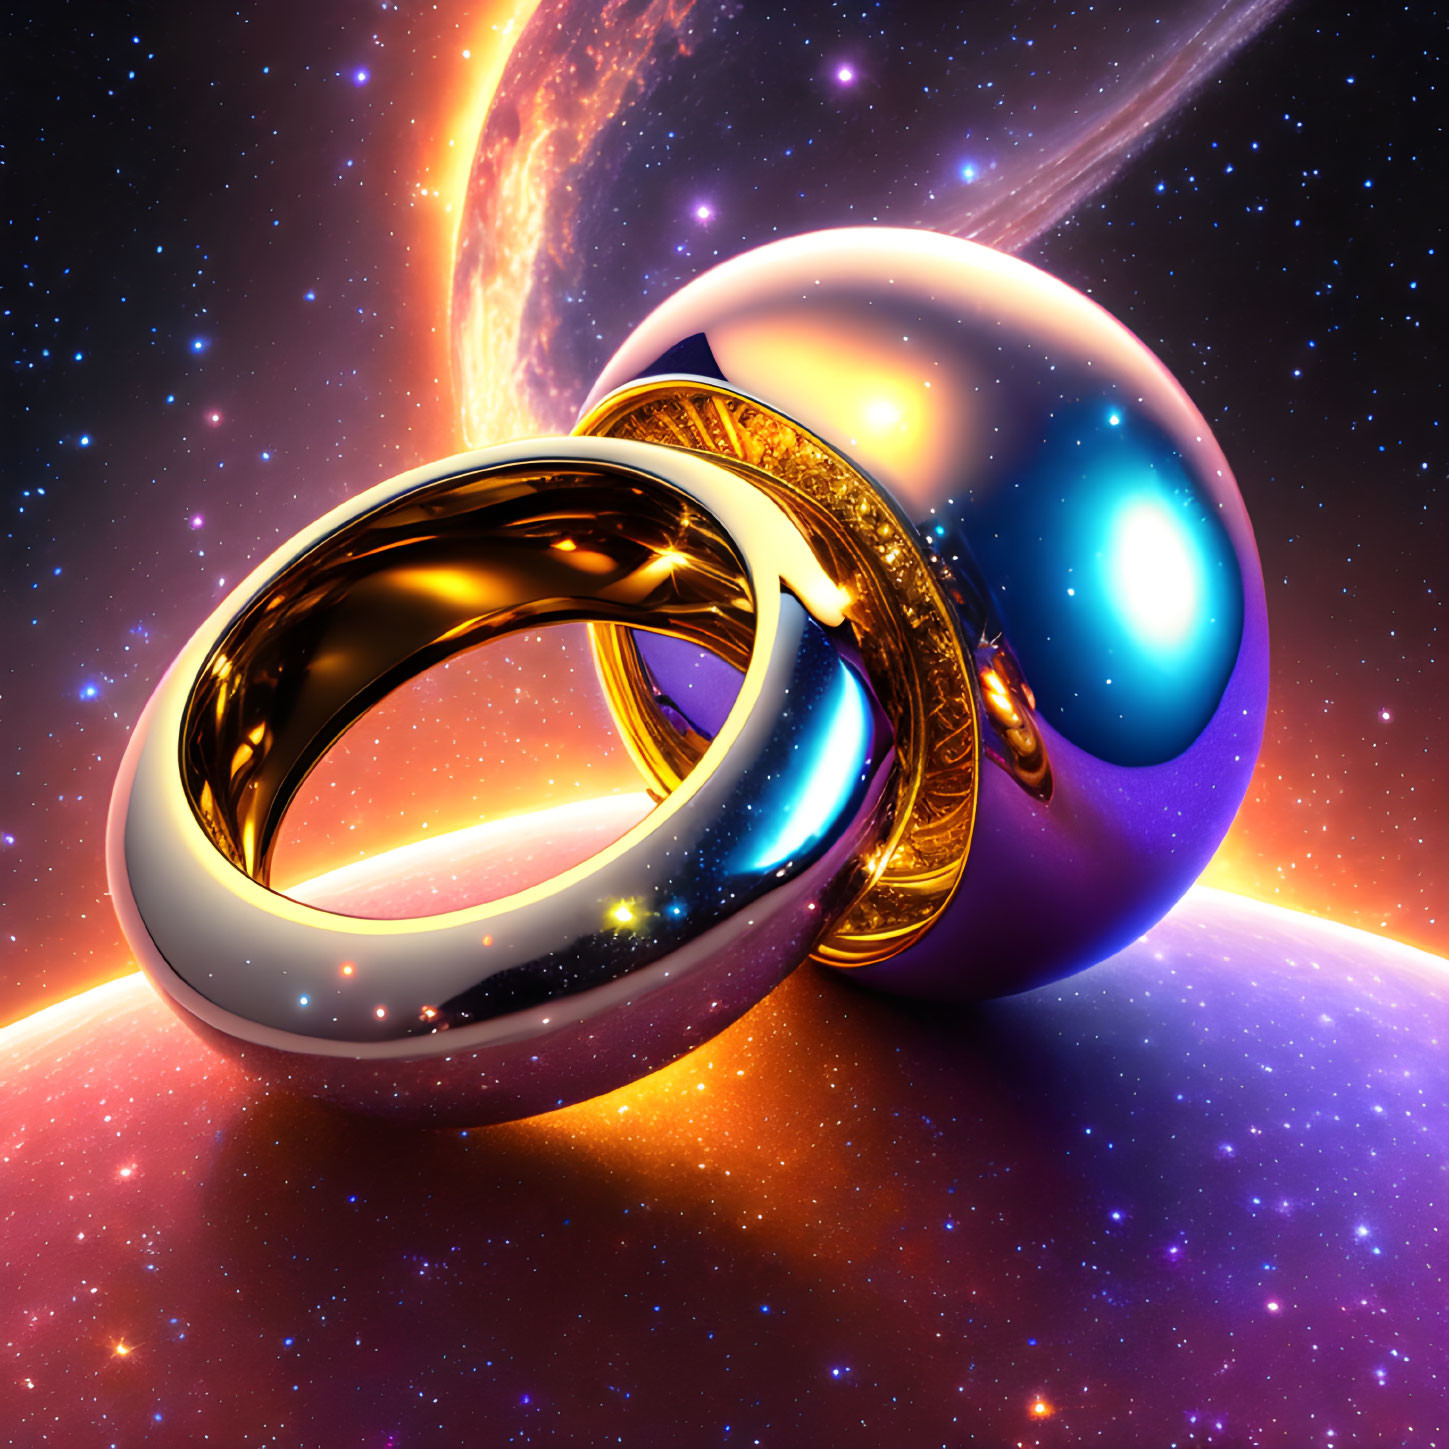 Ornate golden rings on cosmic background with vibrant colors